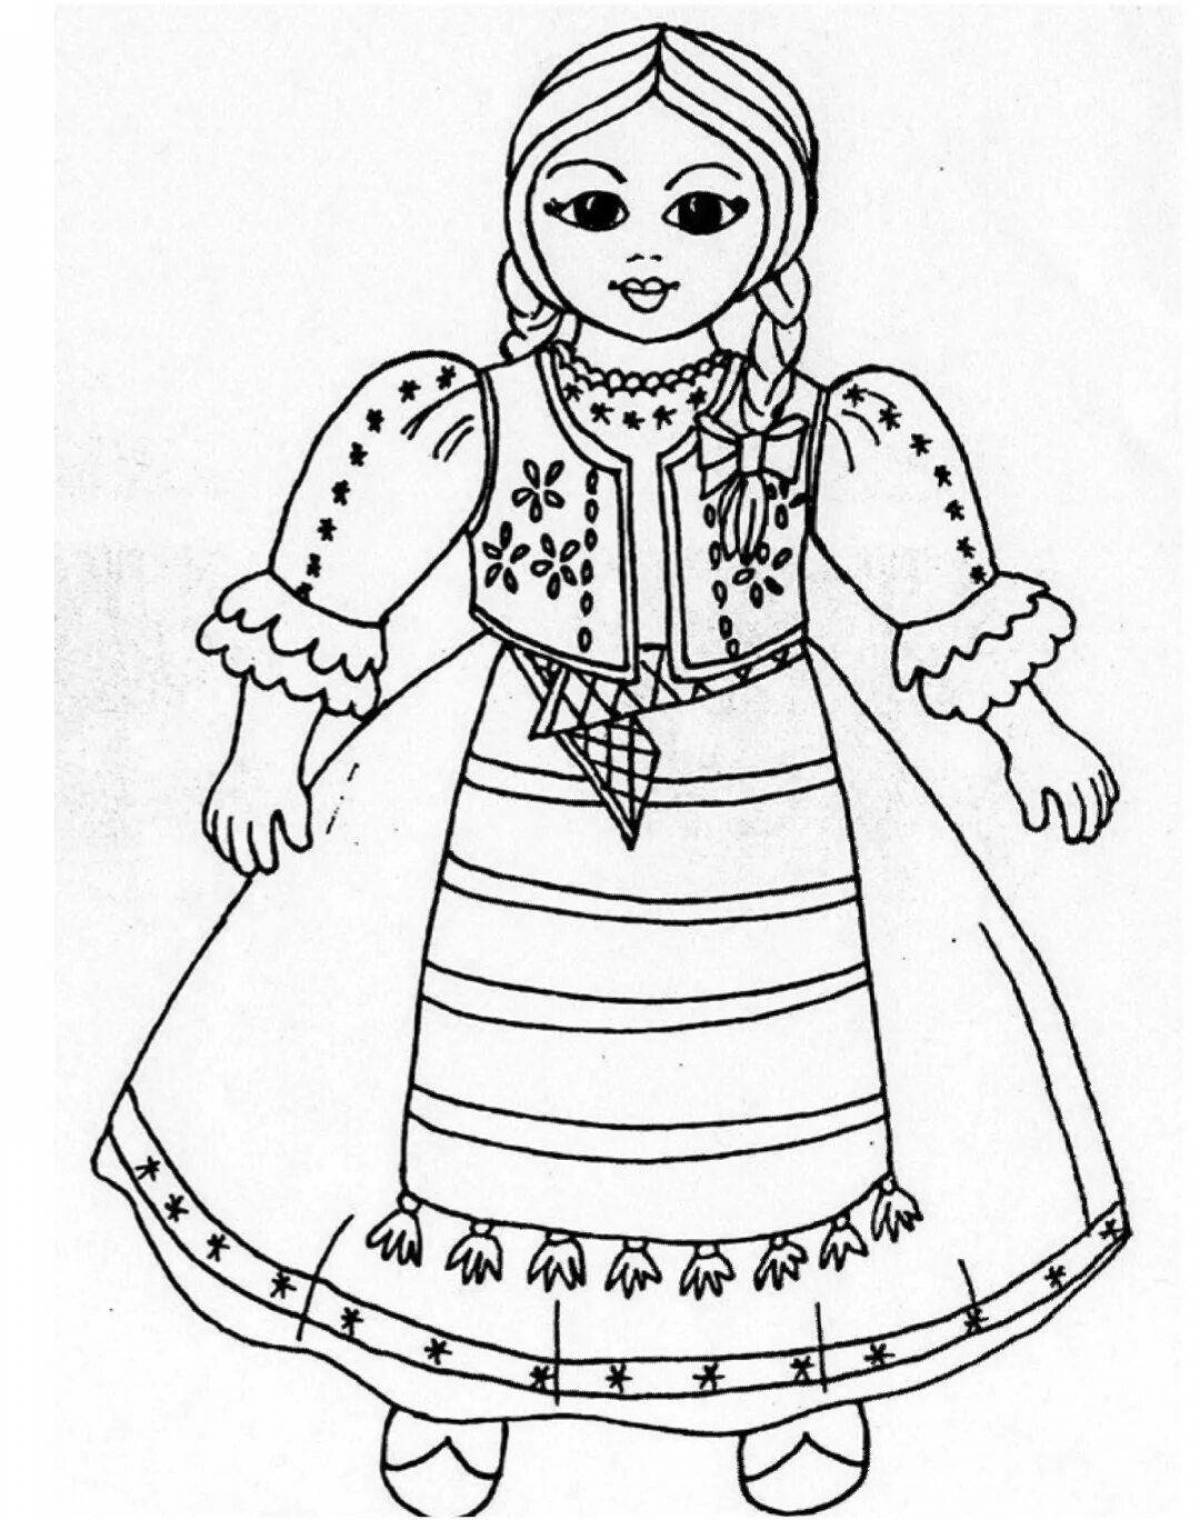 Coloring pages in folk costume for children